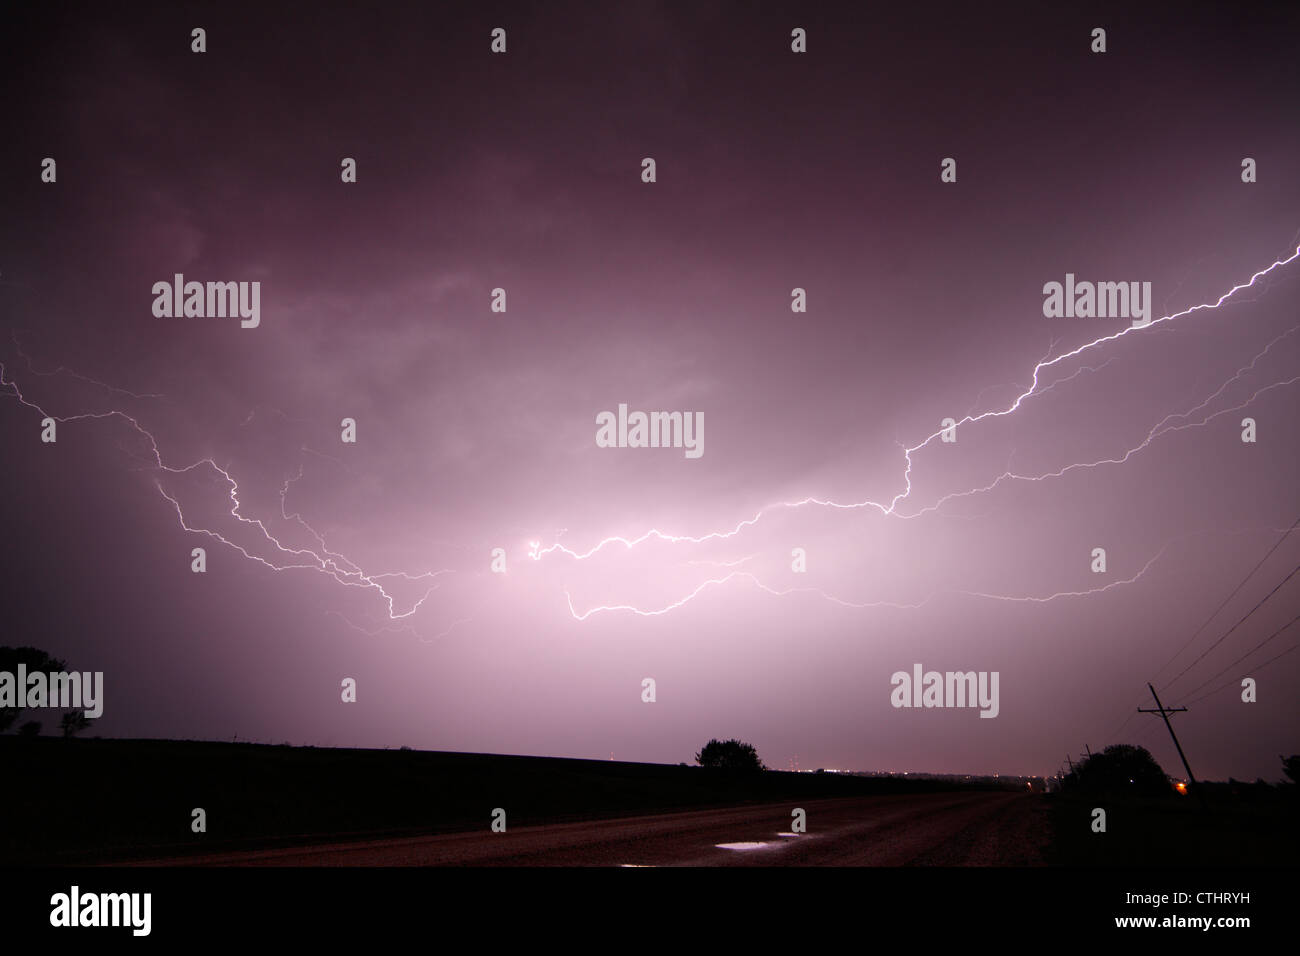 Multiple lightning bolts crawl along the underside of a severe thunderstorm over a wet gravel road at night. Stock Photo